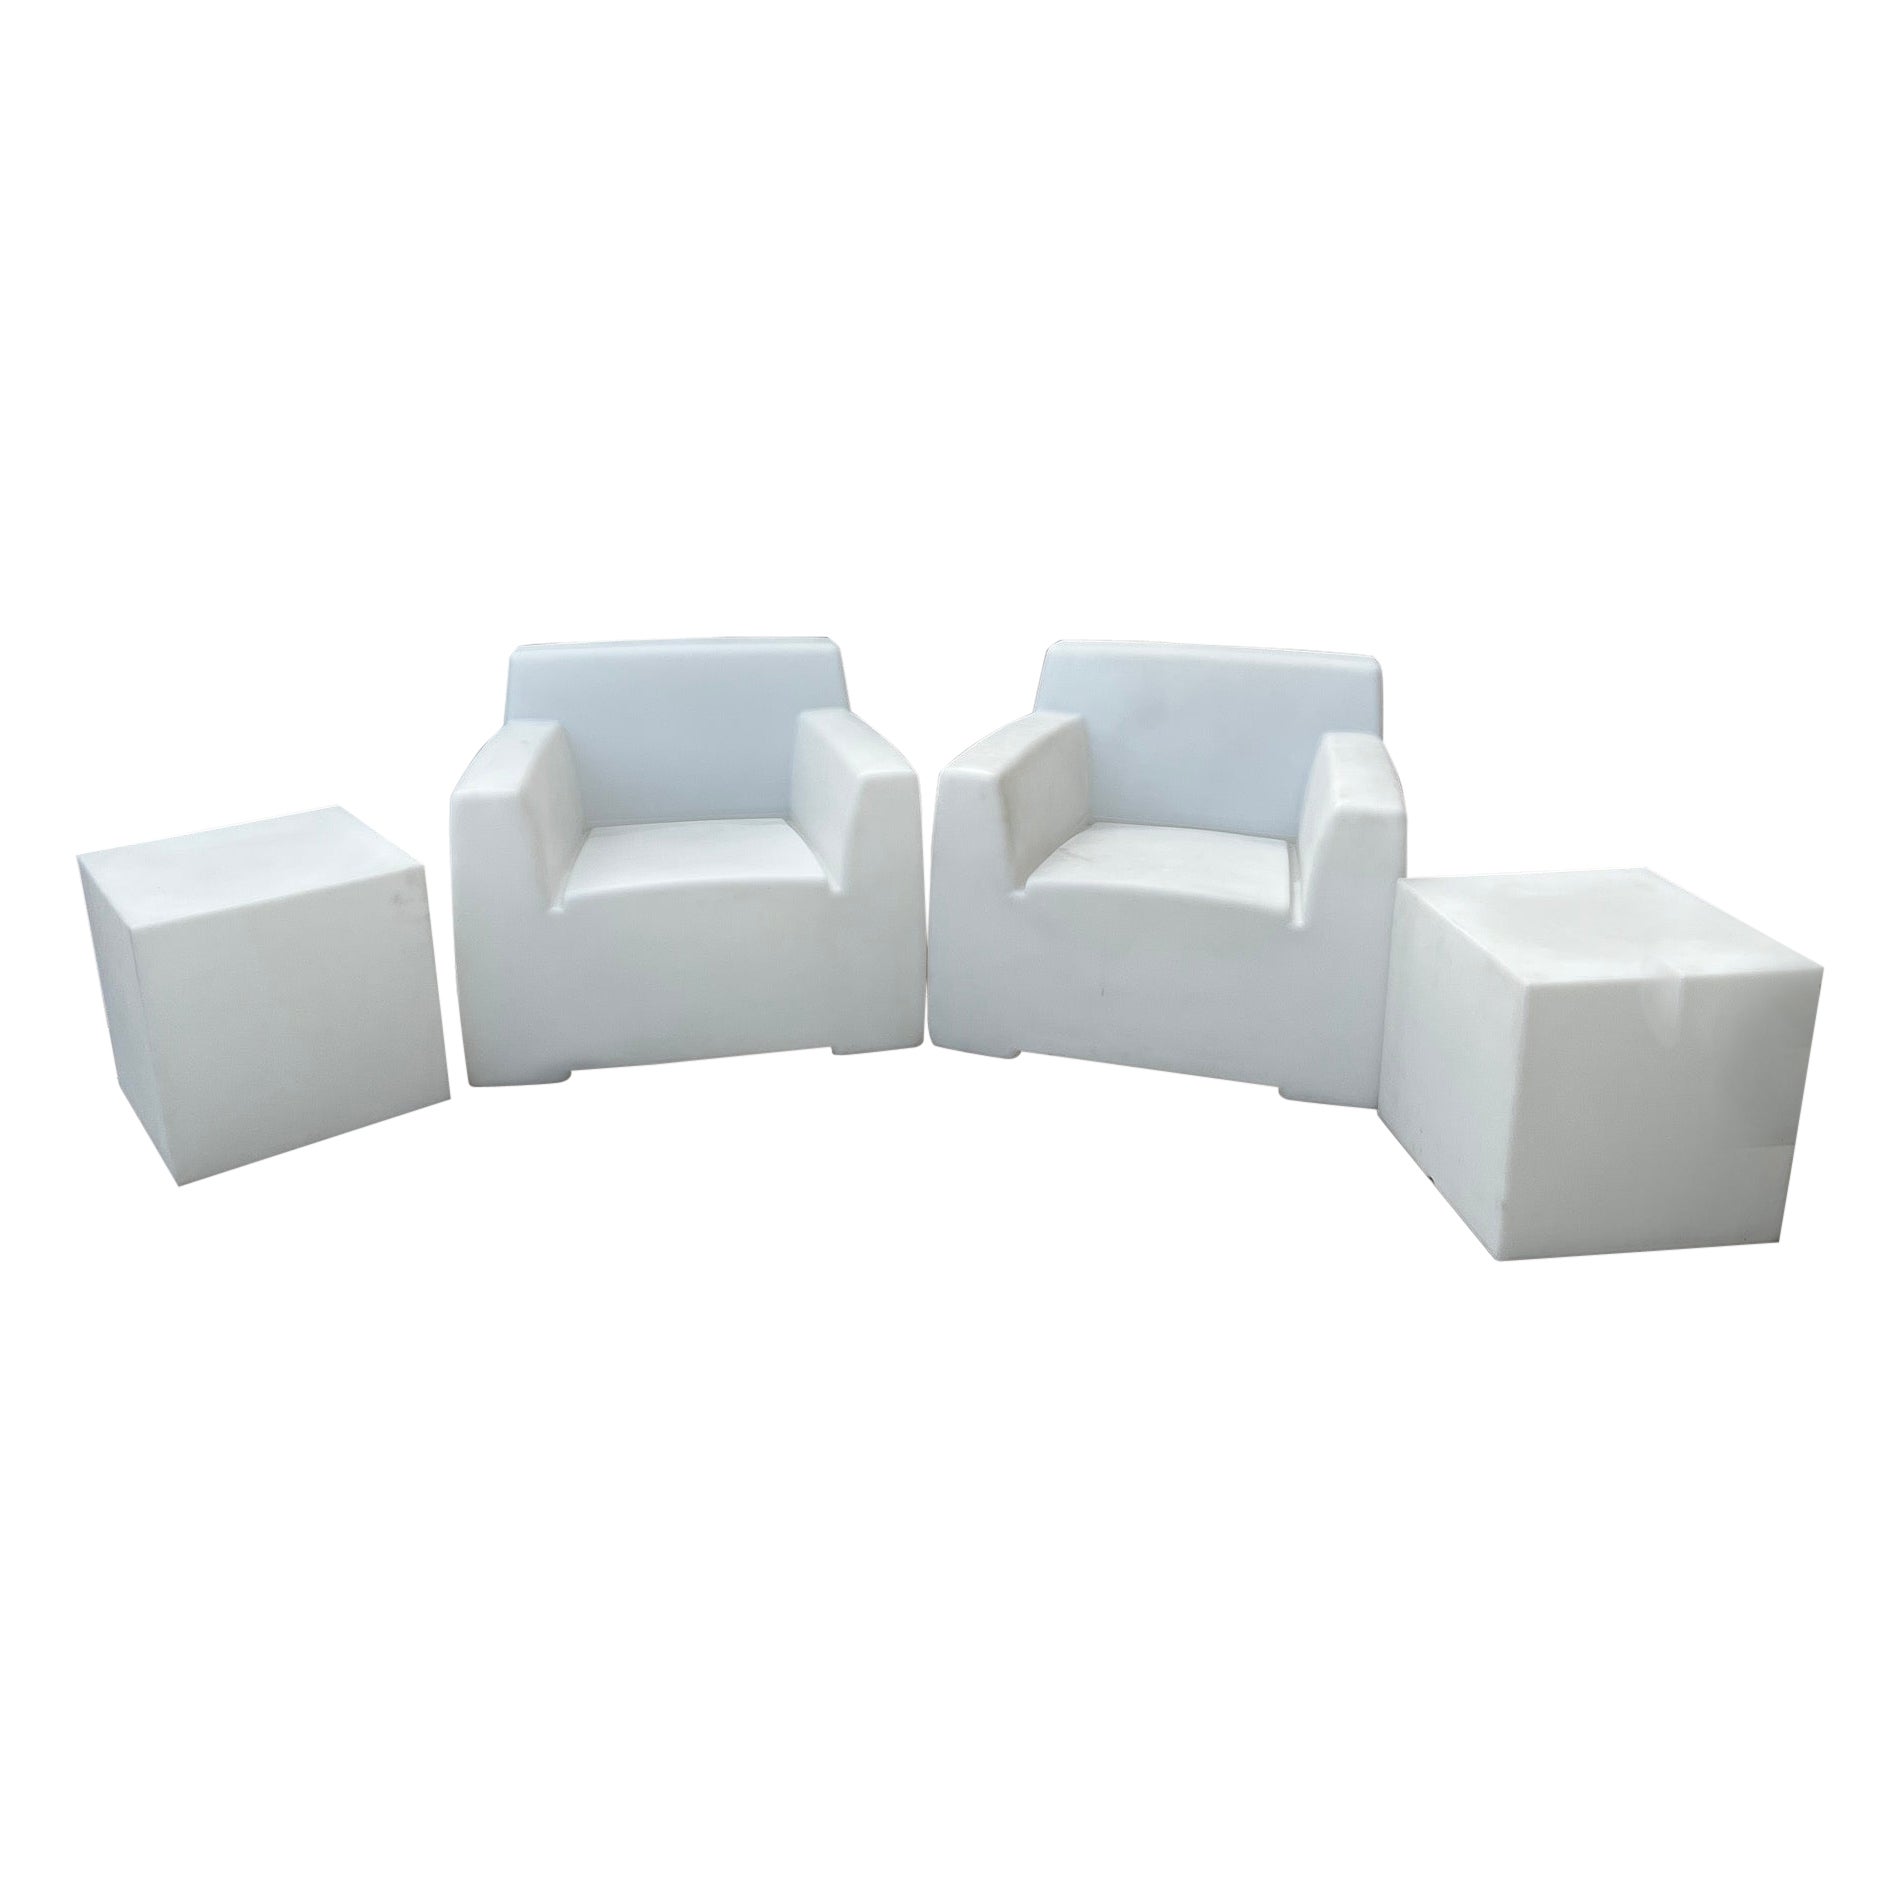 Inout Garden Set in White Opal Polyethylene and White by Paola Navone for Gervas